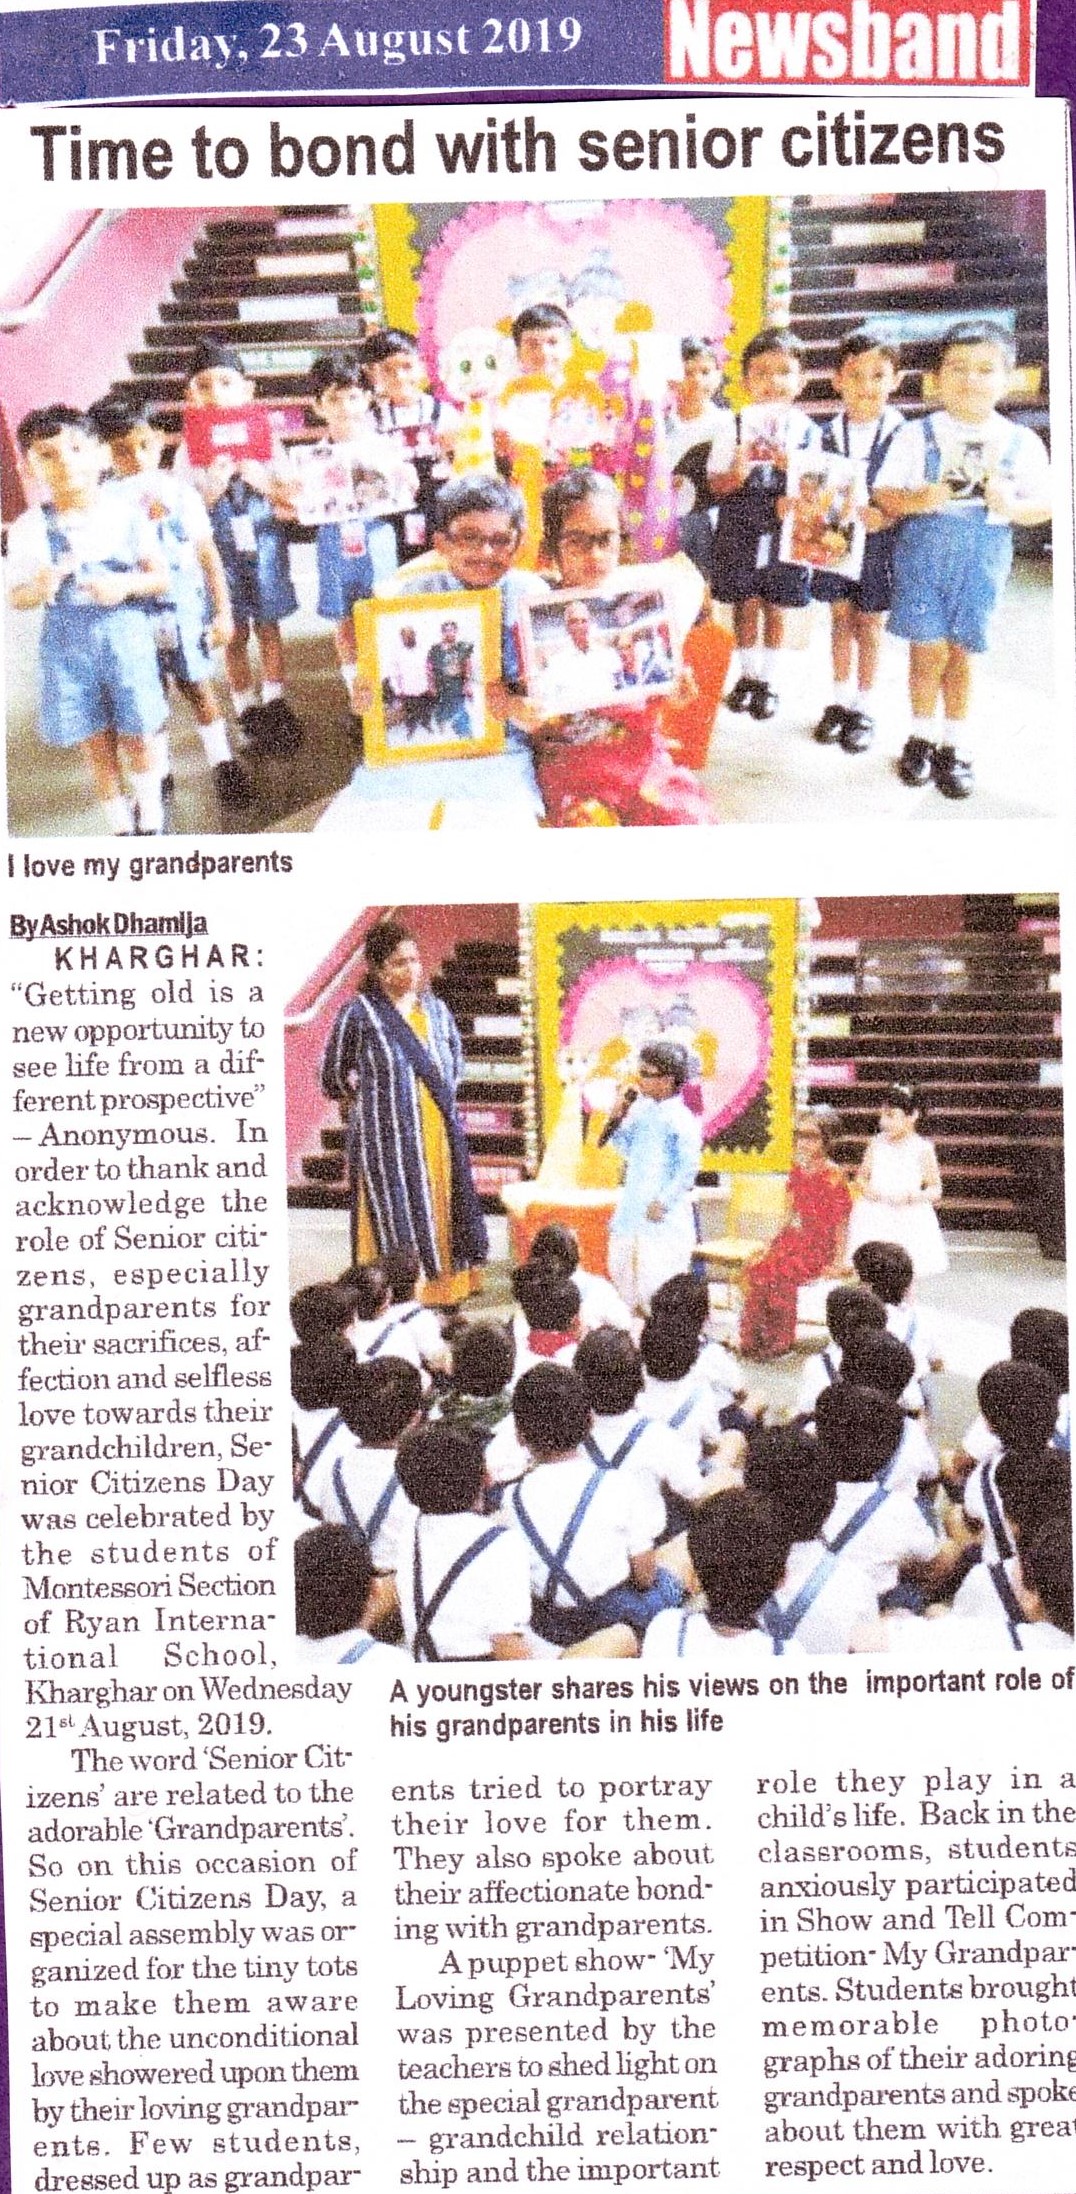 Time to bond with senior citizens was mentioned in News band - Ryan International School, Kharghar